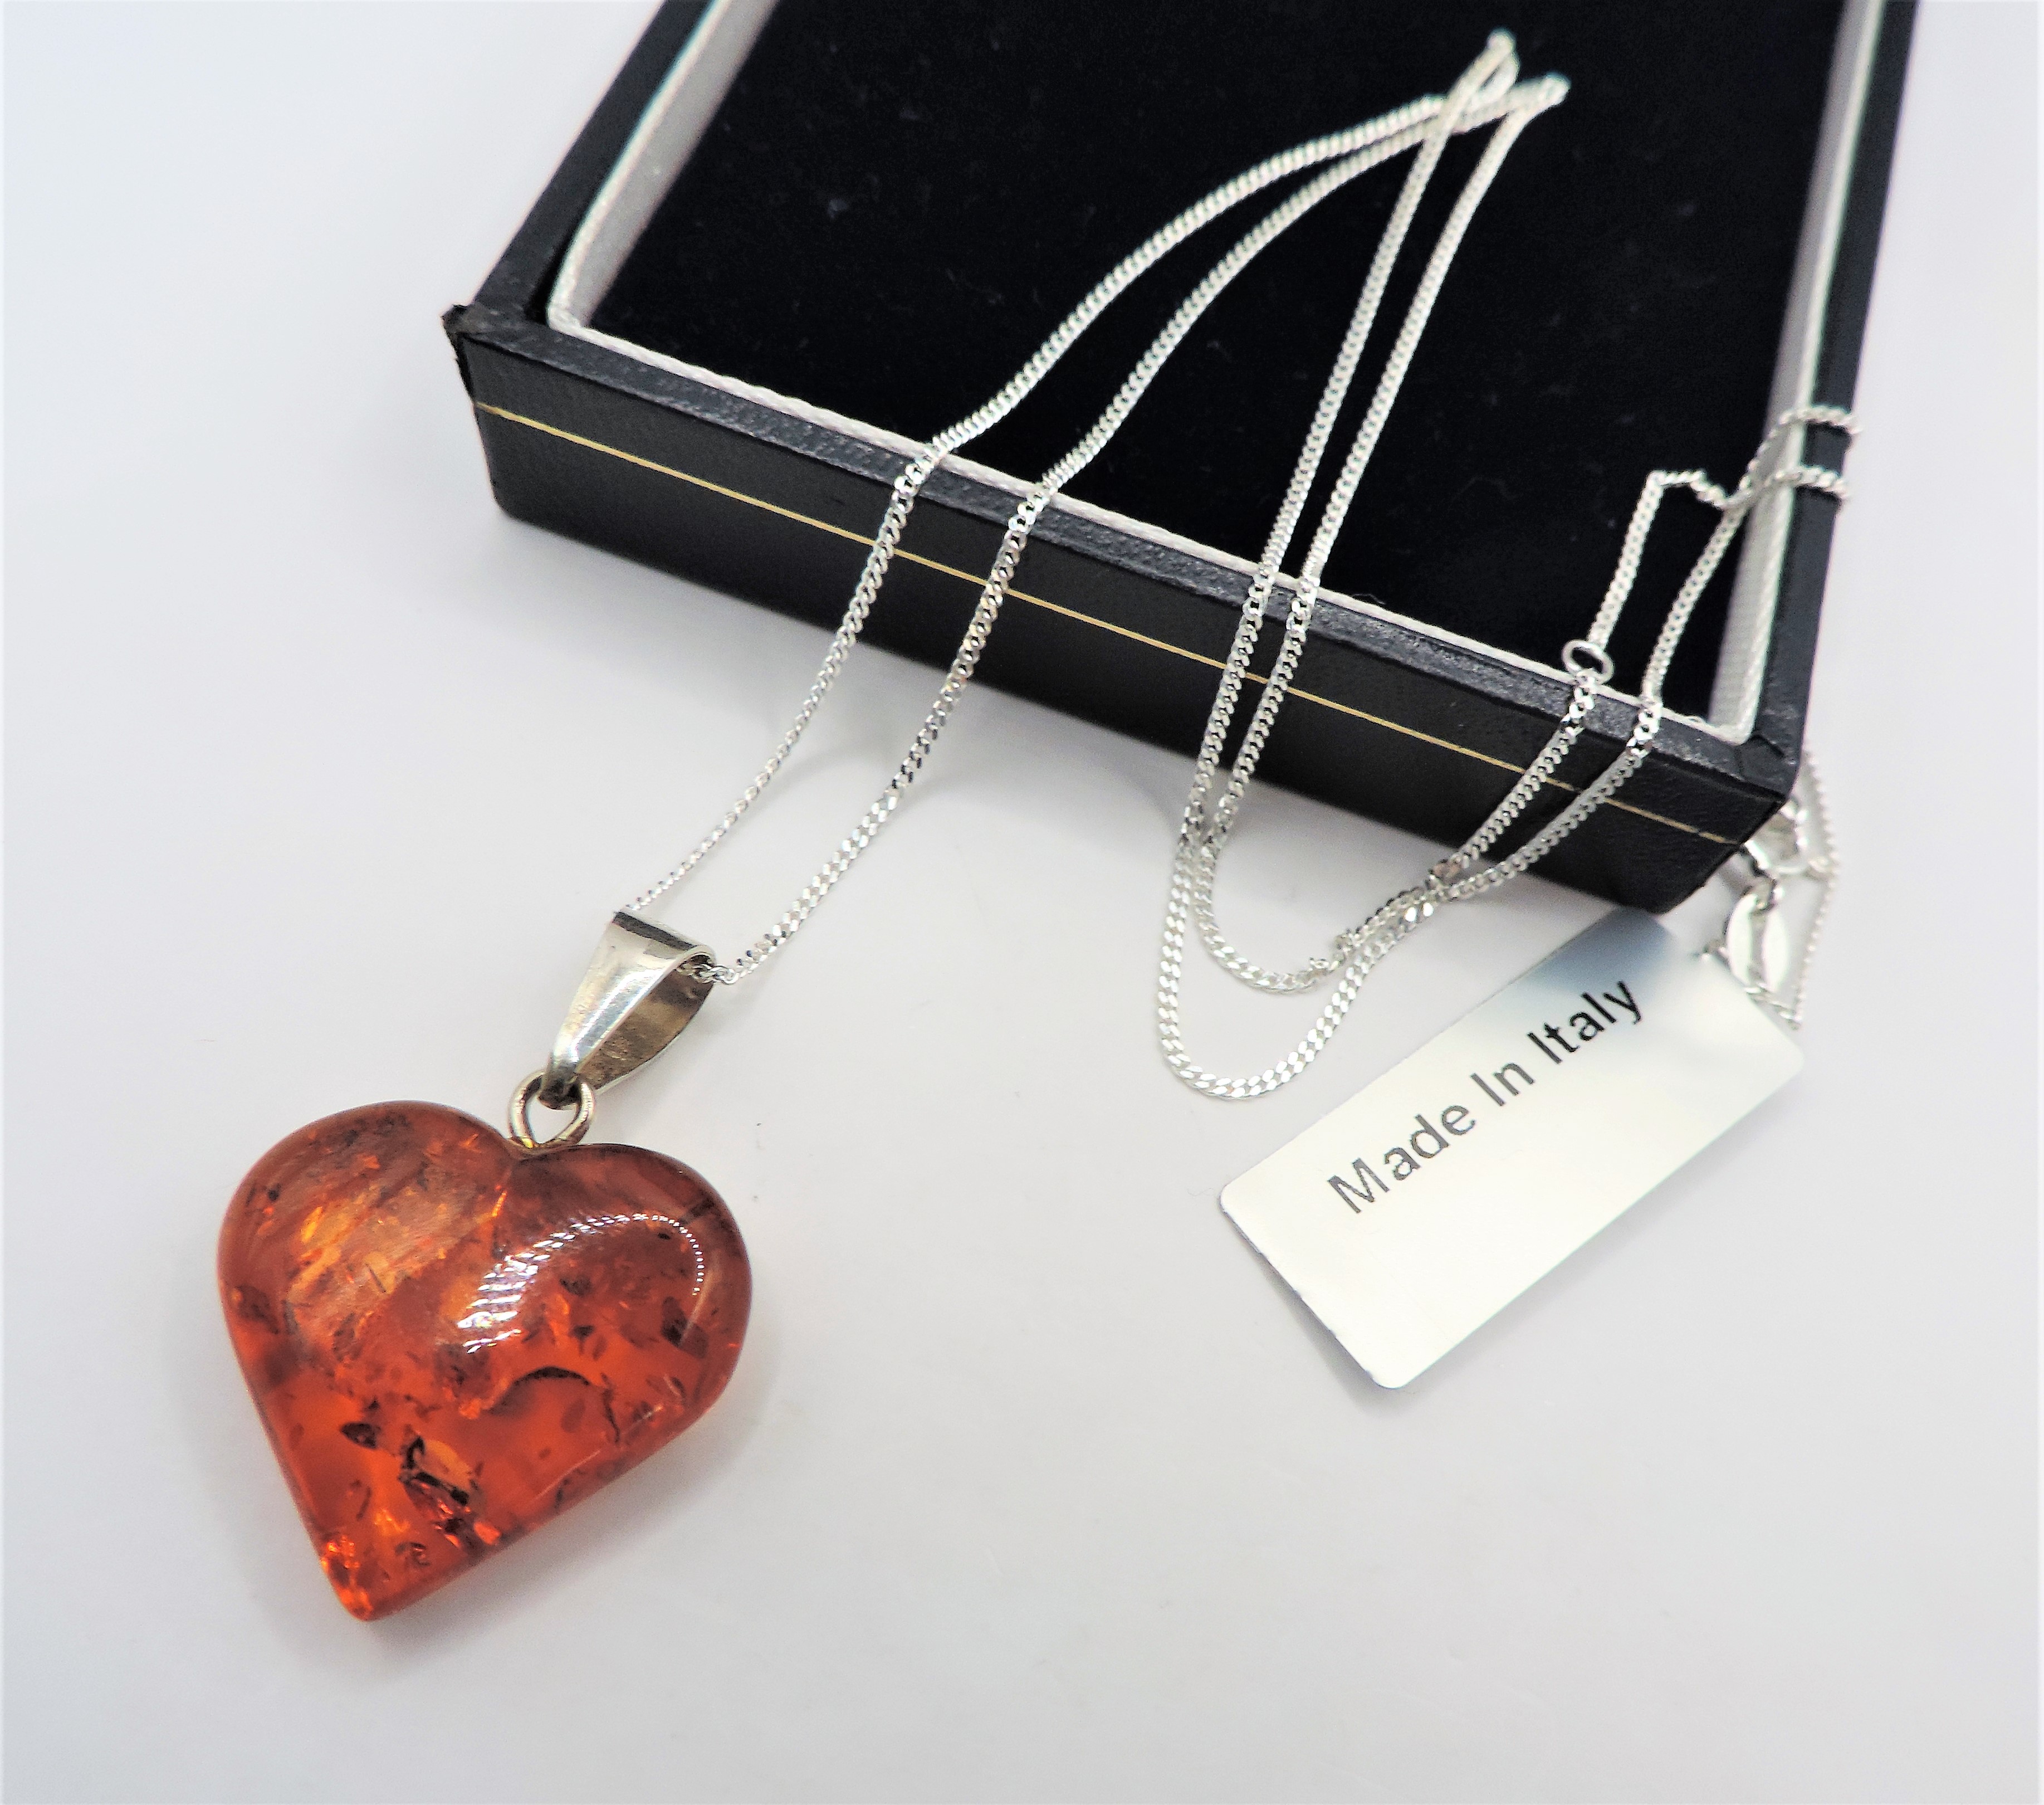 Sterling Silver Baltic Amber Heart Pendant Necklace - Image 2 of 2